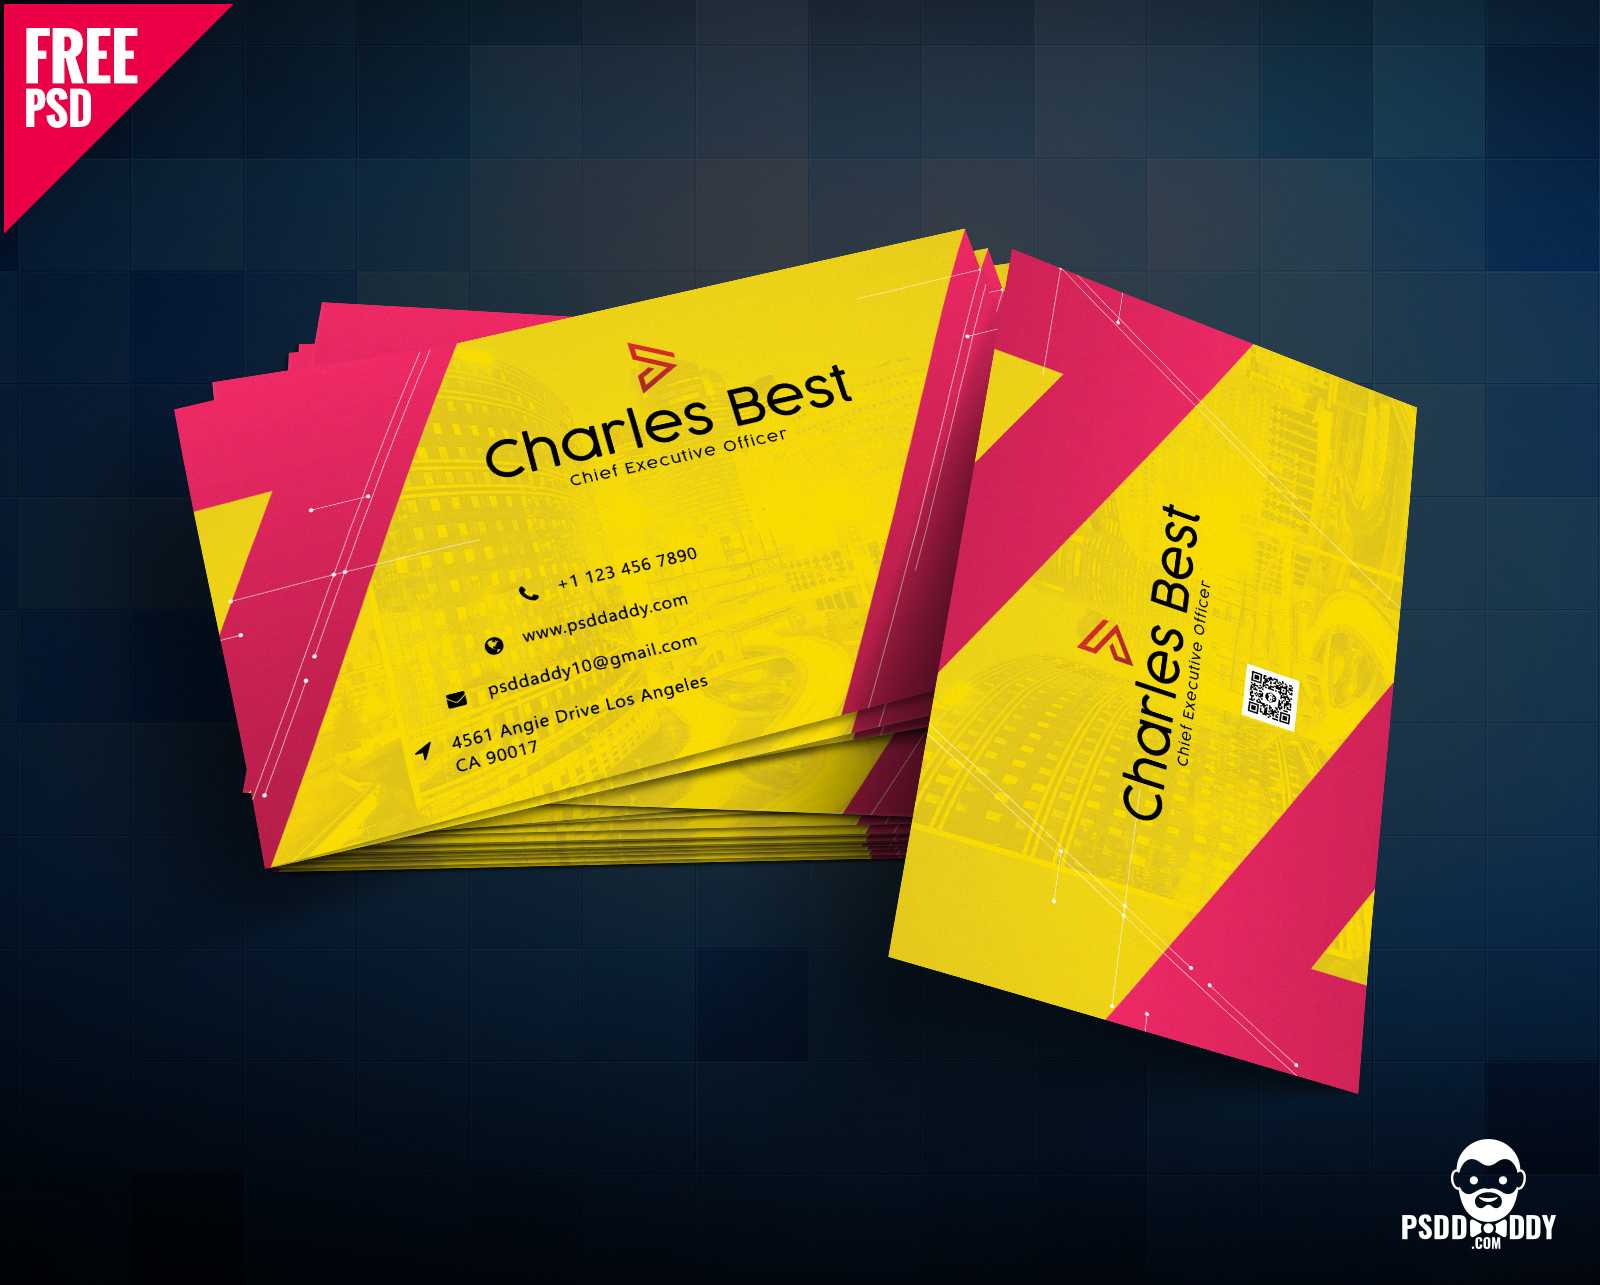 Download] Creative Business Card Free Psd | Psddaddy For Business Card Size Template Psd